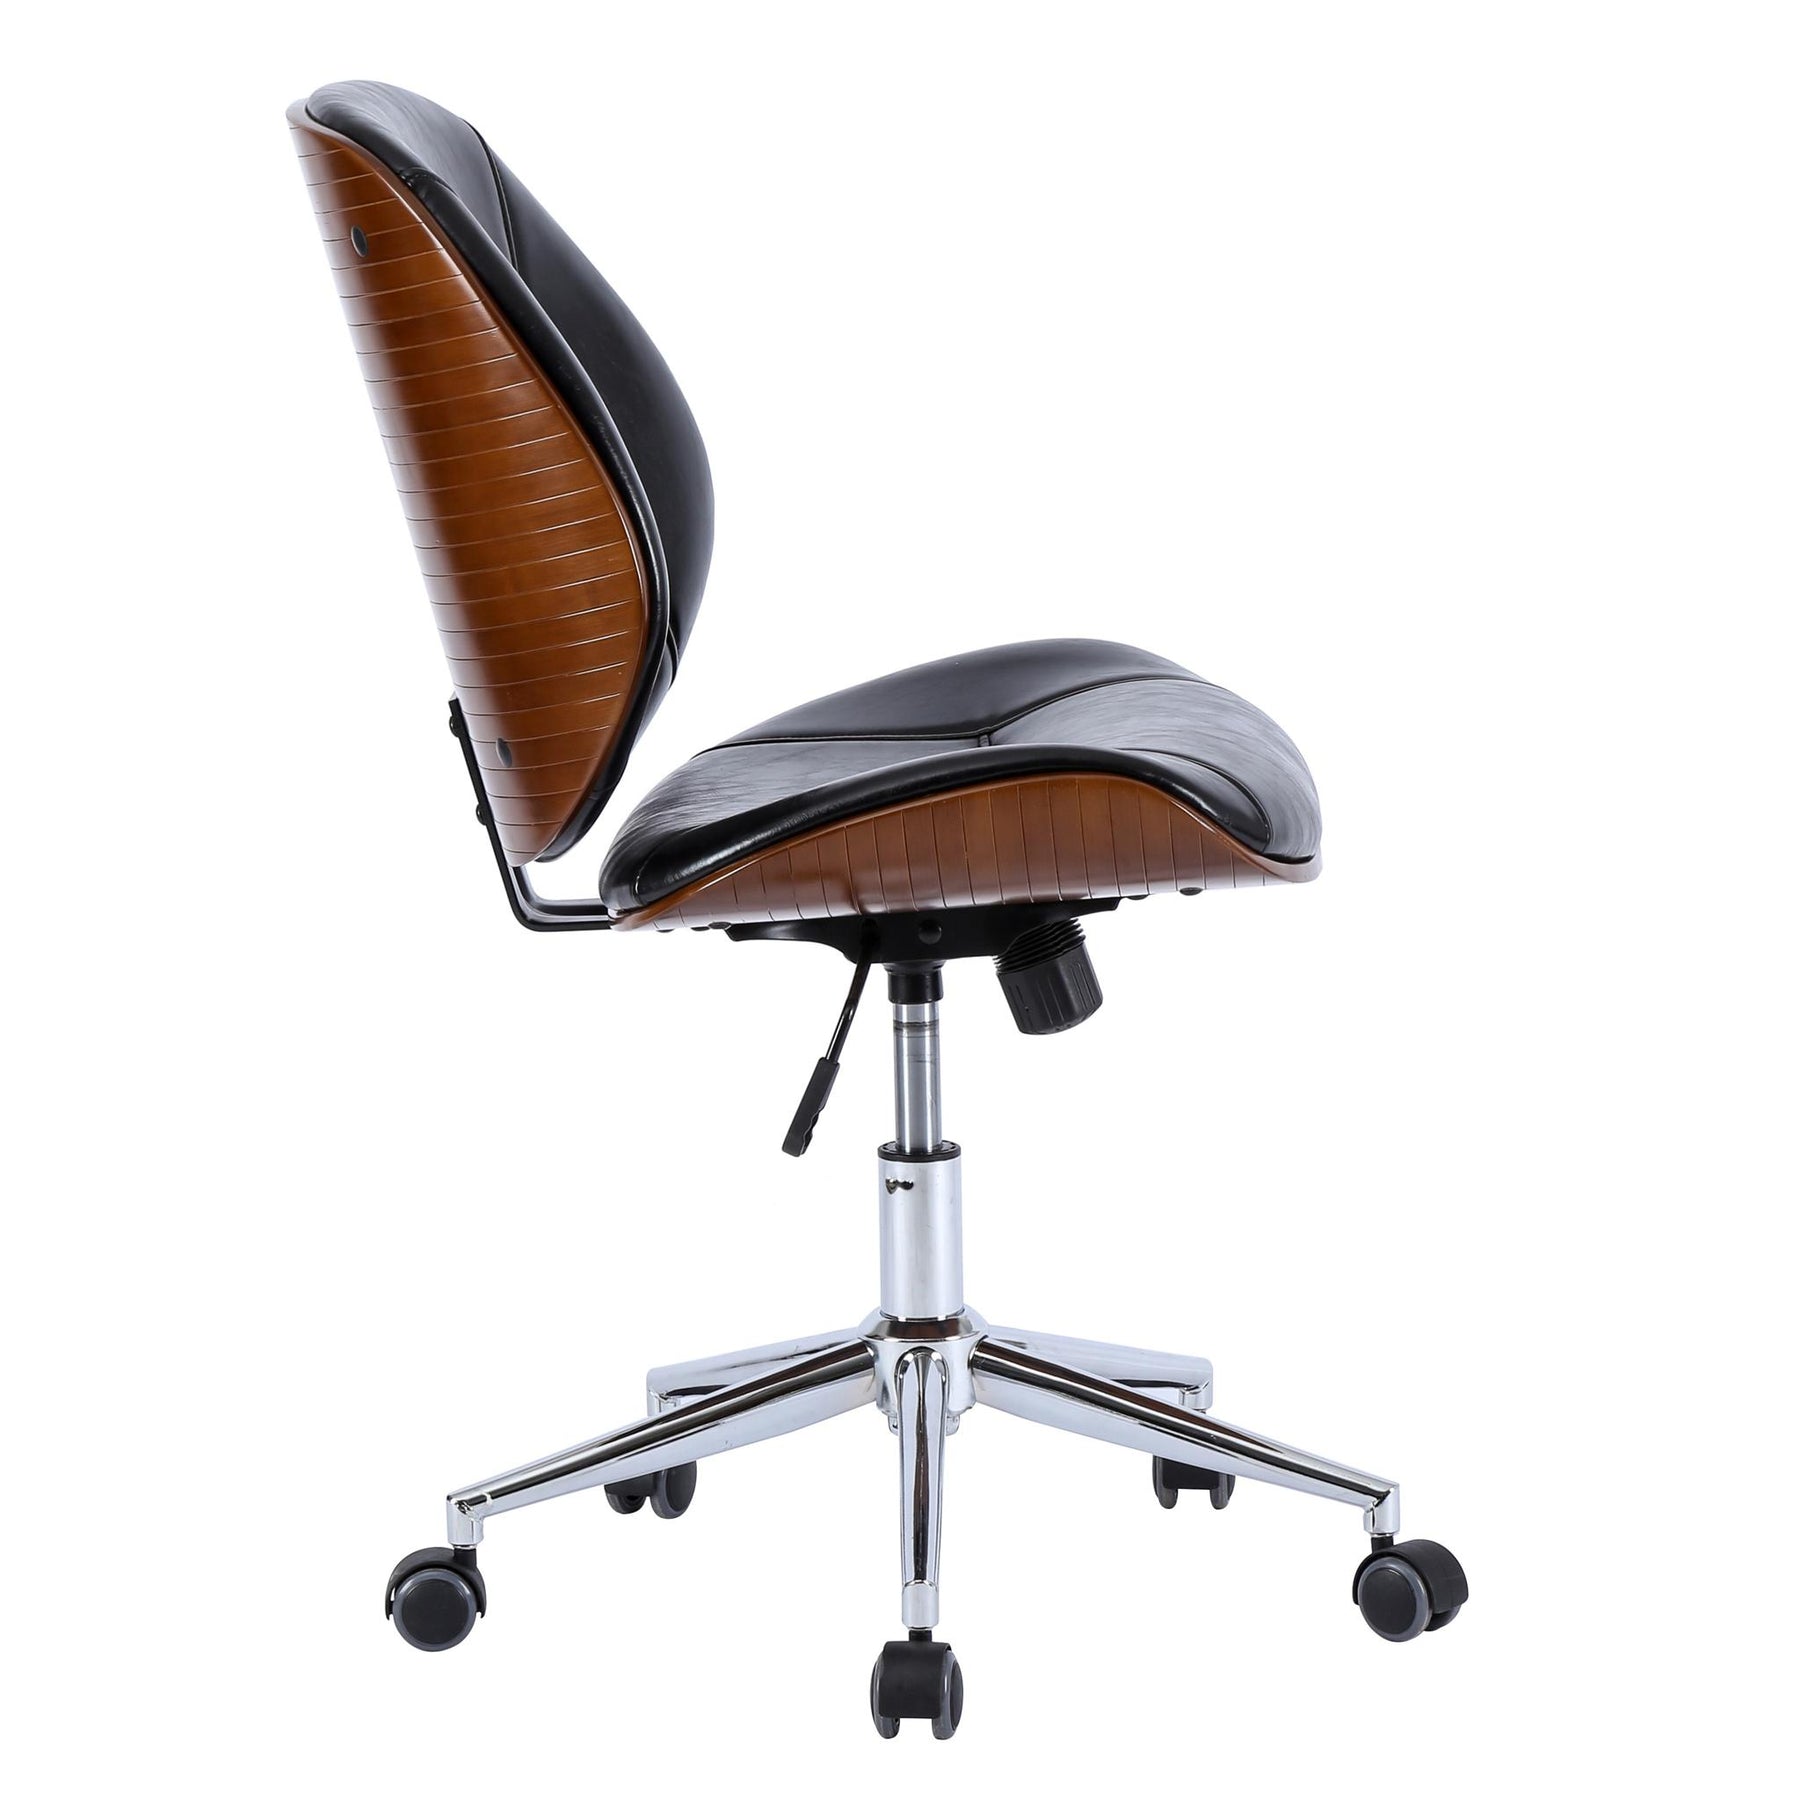 Shaun PU Leather Bamboo Office Chair by New Pacific Direct - 1160023